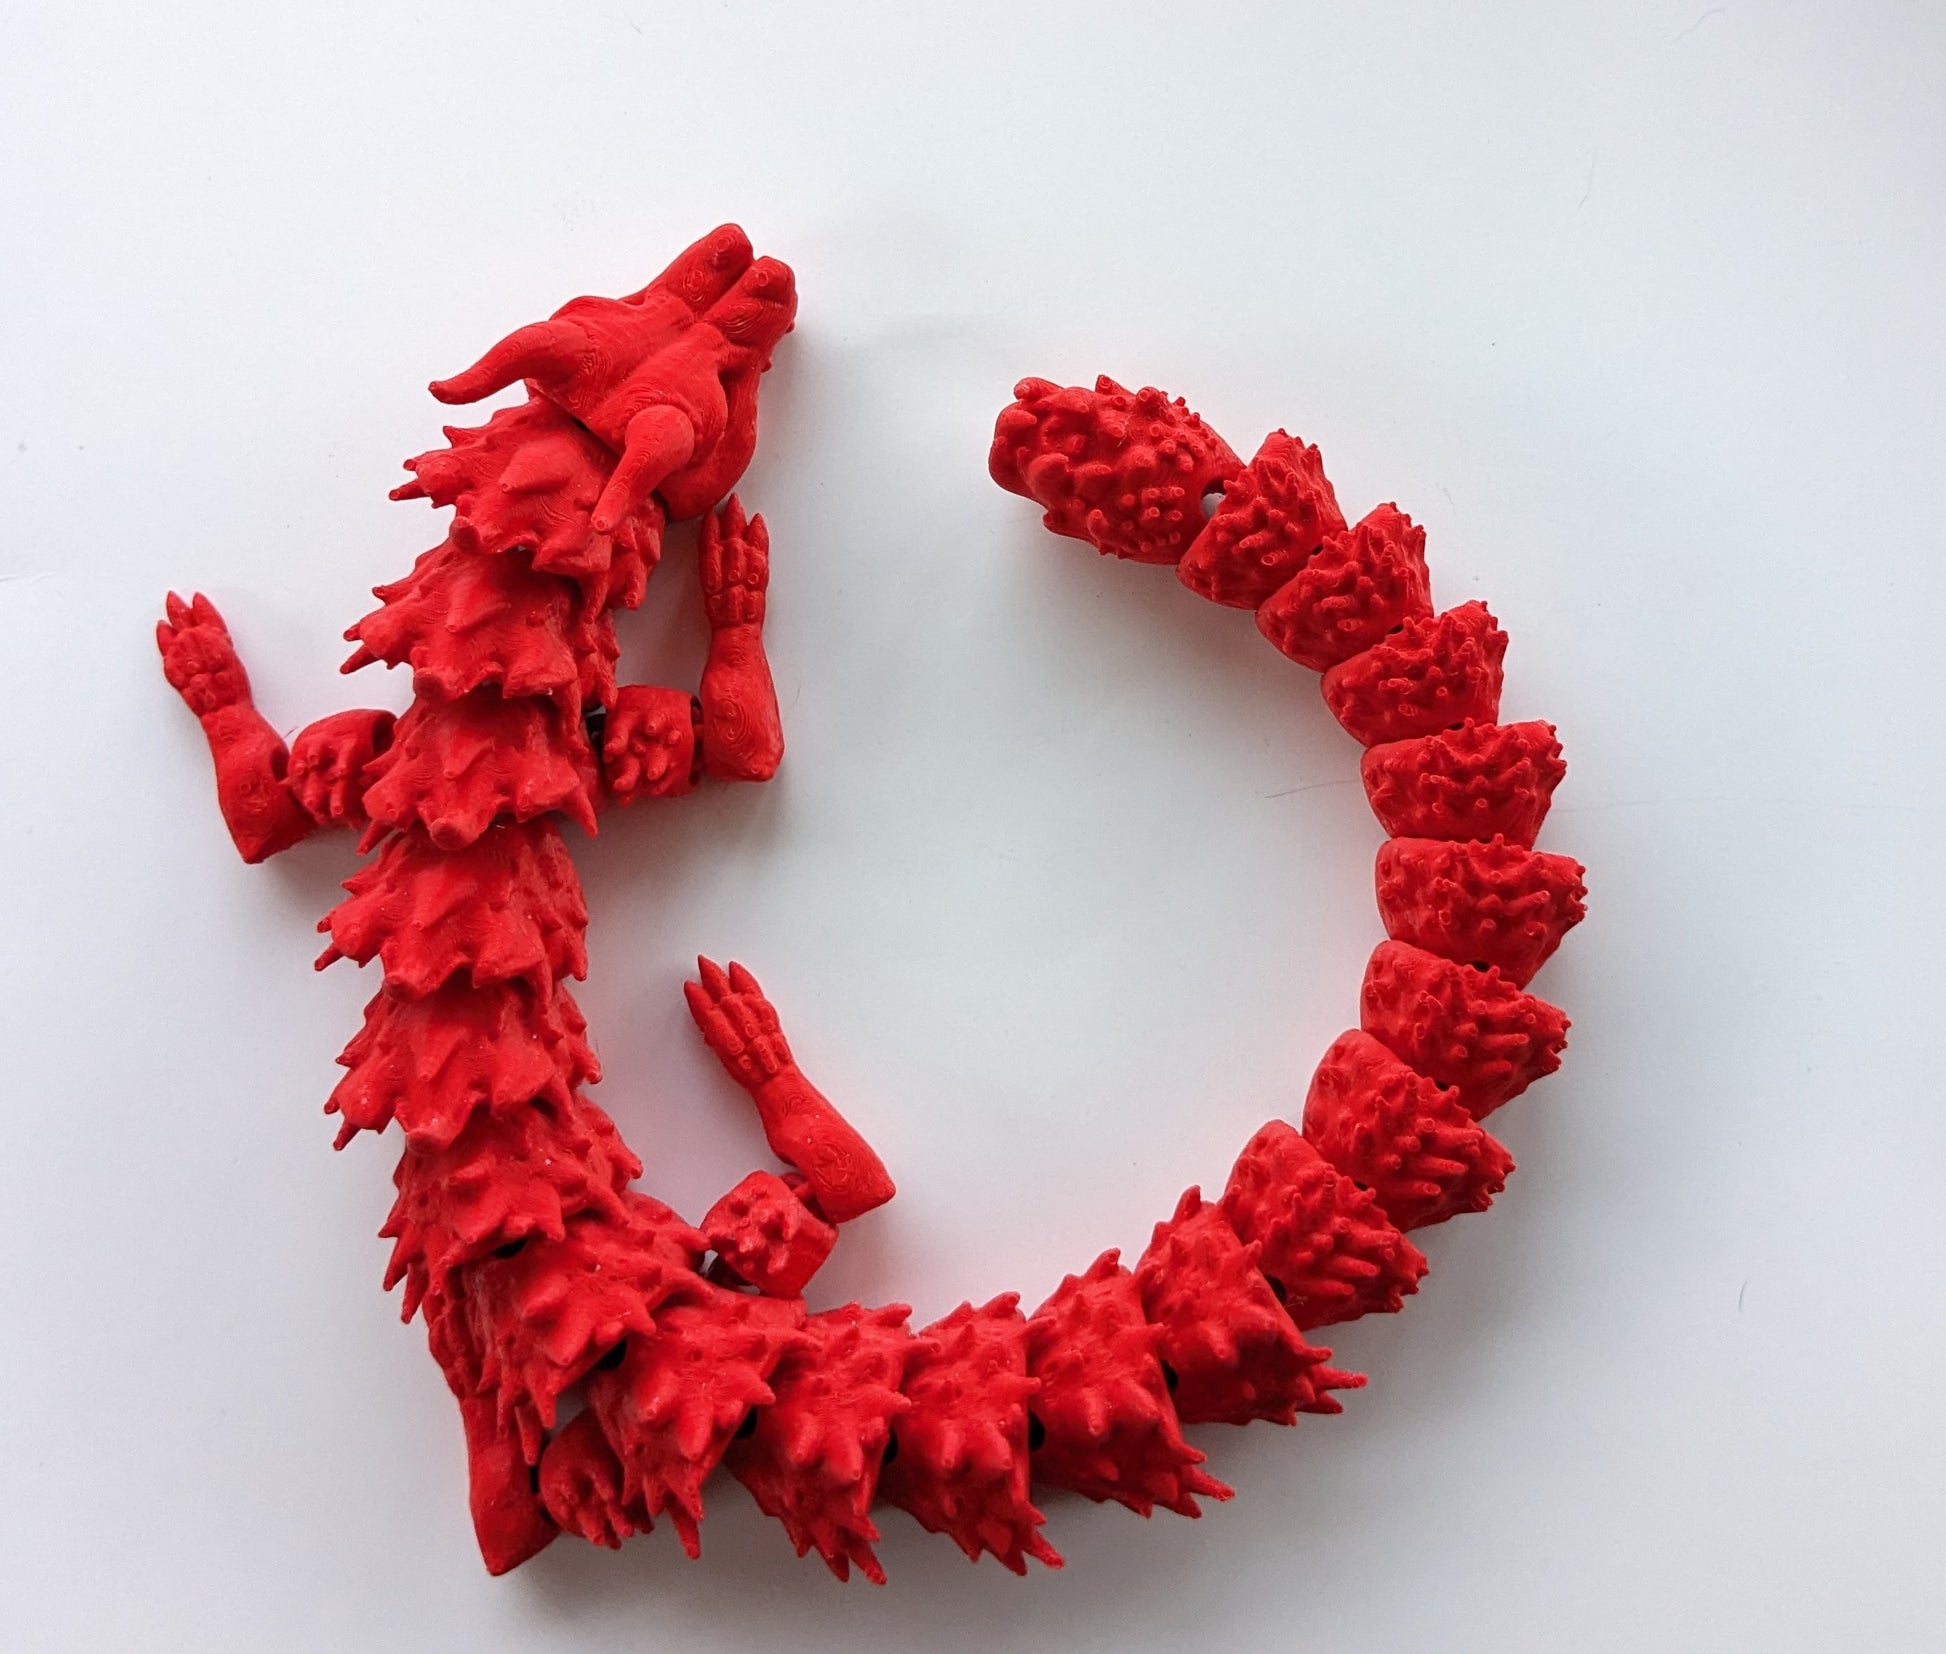 Red 3D printed articulated dragon